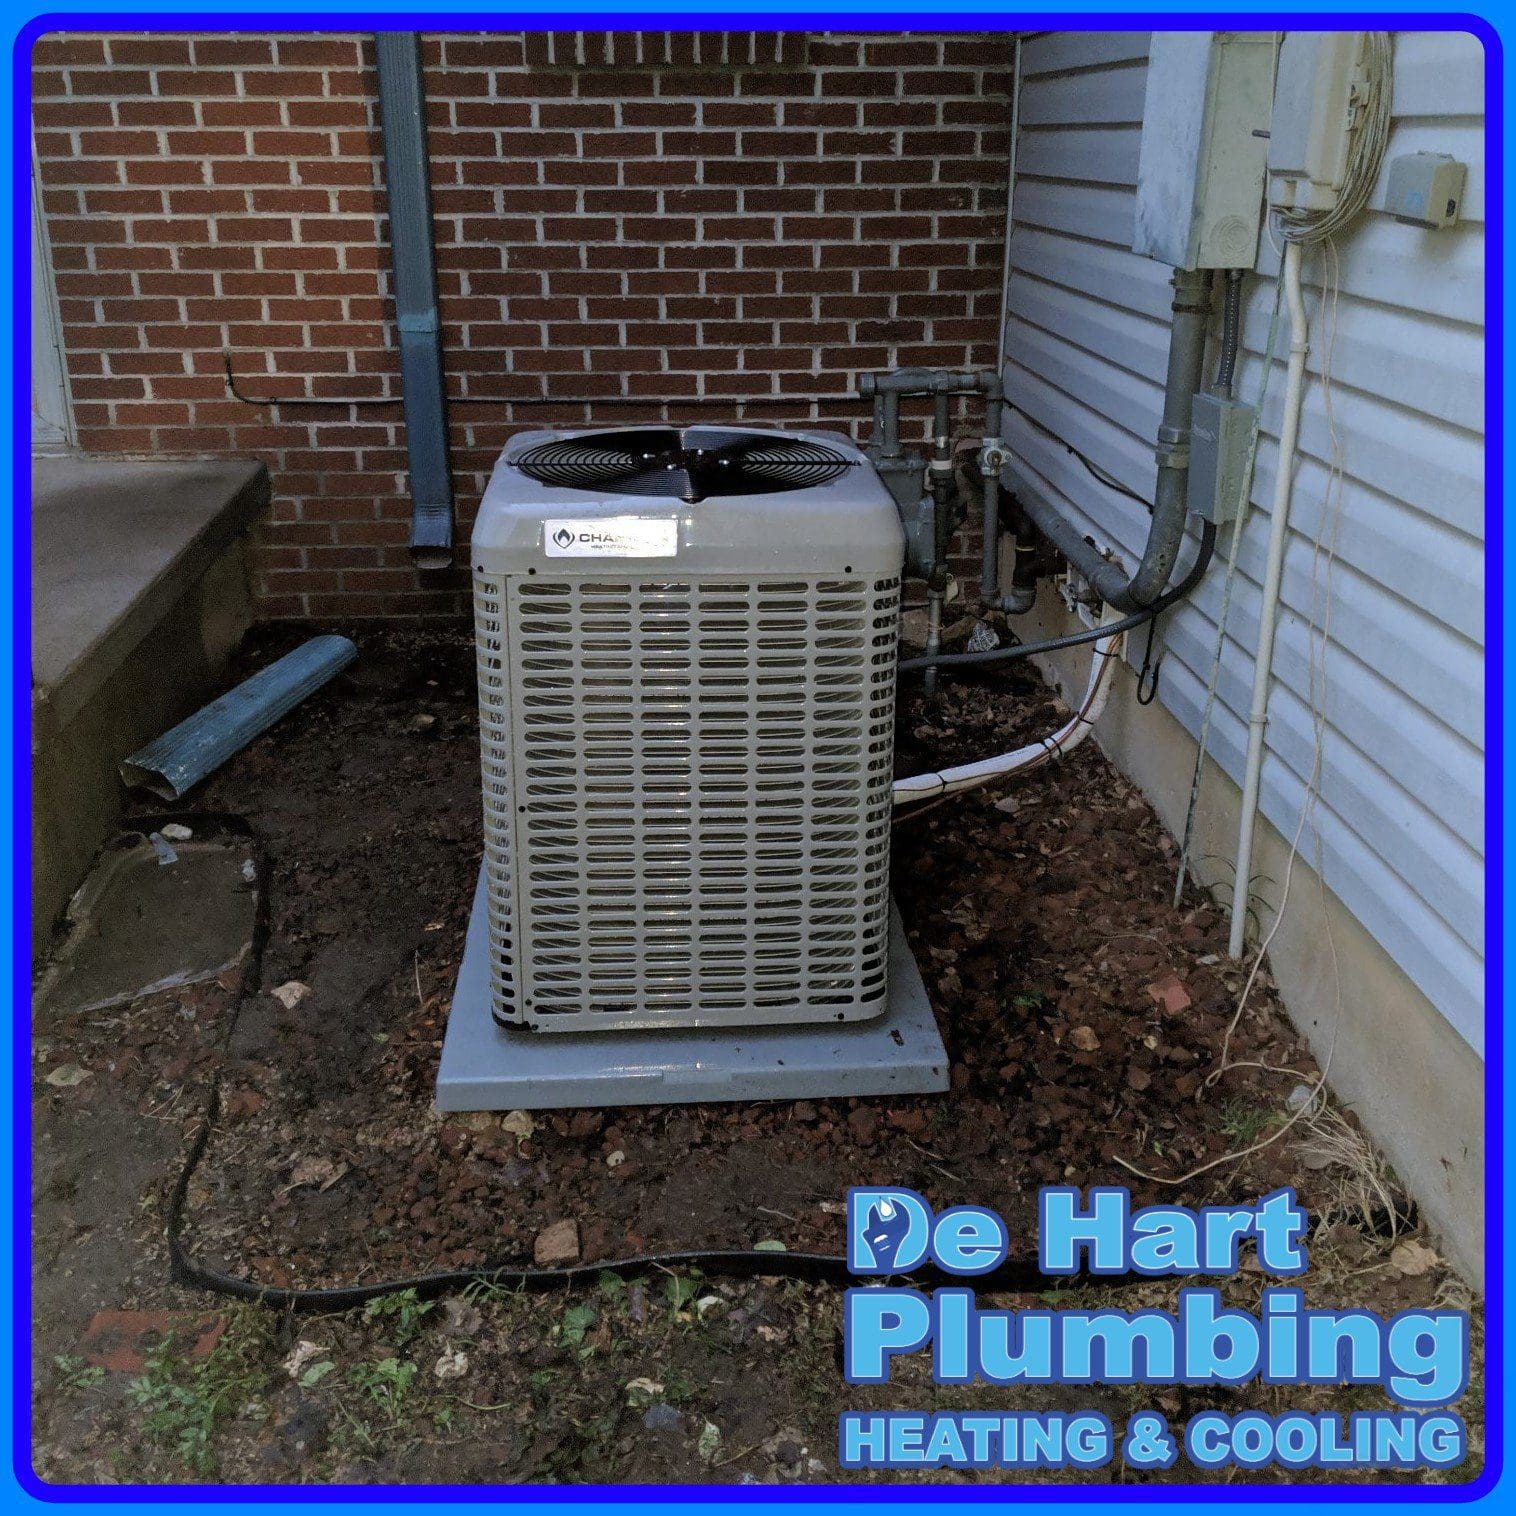 AC Benefits should my outside ac unit blow hot air water softener tax credit hvac services kansas air conditioner blowing hot air inside and cold air outside standard plumbing near me sink gurgles when ac is turned on government regulations on air conditioners manhattan ks water m and b heating and air manhattan kansas water bill furnace flame sensors can an ac unit leak carbon monoxide why does my ac keep blowing hot air furnace issues in extreme cold seer rating ac vip exchanger can you bypass a flame sensor my furnace won't stay on ac unit in basement leaking water faucet repair kansas city clean furnace ignitor r22 refrigerant laws can you buy r22 without a license manhattan remodeling new refrigerant regulations ac unit not blowing hot air central air unit blowing warm air bathroom remodeling services kansas city ks pilot light is on but furnace won't start bathroom restore why furnace won't stay lit k s services sewer line repair kansas city air conditioner warm air how to check the pilot light on a furnace manhattan ks pollen count cleaning igniter on gas furnace central air unit won't turn on why my furnace won't stay lit why won't my furnace stay on ac is just blowing air why is ac not turning on can t find pilot light on furnace how much for a new ac unit installed plumbing and heating logo r 22 refrigerant for sale air conditioner leaking water in basement ac unit leaking water in basement air manhattan where to buy flame sensor for furnace outdoor ac unit not blowing hot air drain tiles for yard furnace won't stay ignited ac plunger not working what if your ac is blowing hot air how to bypass flame sensor on furnace can i buy refrigerant for my ac what is a furnace flame sensor is r22 a cfc goodman ac unit maintenance how to light your furnace why is my ac not blowing hot air a better plumber heating and cooling home ac cools then blows warm gas not lighting on furnace how to fix carbon monoxide leak in furnace what are those tiny particles floating in the air standard thermostat ks standard ac service free estimate r22 drop-in replacement 2022 safelite manhattan ks goodman ac repair how to check for cracked heat exchanger heater not lighting energy efficient air conditioner tax credit 2020 why won t my furnace stay lit how does drain tile work bathroom remodel kansas vip air duct cleaning is a new air conditioner tax deductible 2020 how to bypass a flame sensor on a furnace ac blowing hot air instead of cold how to clean flame sensor in furnace 14 seer phase out my hvac is not blowing hot air how to check a pilot light on a furnace my ac is blowing warm air kansas gas manhattan ks my ac is not blowing hot air my gas furnace won't stay on gas furnace wont ignite bathroom remodel and plumbing ac system install goodman heating and air conditioning reviews how to find pilot light on furnace water heater repair kansas furnace will not stay running ac on but blowing warm air what does sump pump do what causes a heat exchanger to crack pilot is lit but furnace won t turn on do they still make r22 ac units problems with american standard air conditioners new flame sensor still not working cleaning services manhattan ks gas furnace won't ignite self igniting furnace won't stay lit ac blowing warm water heater installation kansas city cleaning a flame sensor can you clean a furnace ignitor air conditioning blowing warm air second ac unit for upstairs furnace flame won t stay lit carbon monoxide furnace leak ac sometimes blows warm air auto pilot light not working how to clean a dirty flame sensor k and s heating and air 1st american plumbing heating & air what does the flame sensor do on a furnace cleaning furnace burners all year plumbing heating and air conditioning how much is a new plumbing system pilot light furnace location manhattan kansas water ac leaking water in basement ac running but blowing warm air super plumbers heating and air conditioning furnace doesn't stay lit new epa refrigerant regulations 2023 sila heating air conditioning & plumbing ac started blowing warm air air conditioner blowing hot air instead of cold gas furnace pilot light out how to clean the sensor on a furnace when did they stop making r22 ac units furnace flame sensor cleaning a flame sensor on a furnace ac putting out hot air why won't my furnace stay lit goodman air conditioning repair how long does a furnace ignitor last sump pump repair kansas city my ac is blowing out warm air how to clean a flame sensor on a furnace how to clean furnace ignitor sensor commercial hvac kansas greensky credit union ac is not blowing hot air no flame in furnace what is an r22 ac unit heater won t stay lit bolts plumbing and heating furnace sensor replacement home heater flame sensor realize plumbing how to replace flame sensor on furnace american air specialists manhattan ks water bill hot air coming from ac how to get ac ready for summer ac warm air job openings manhattan ks ductless air conditioning installation manhattan house ac blowing warm air gas heater won t light ac blowing hot air in house pilot light on furnace won t light astar plumbing heating & air conditioning standard air furnace flame sensor where to buy heater won't light electric furnace pilot light what is seer on ac seer recommendations pha.com flame sensor rod check furnace pilot light cleaning flame sensor on furnace furnace won t stay running true home heating and air conditioning furnace repair star city how to clean furnace ignition sensor how to light a furnace how long does a furnace flame sensor last my furnace won t stay lit ac wont cut on when your air conditioner is blowing hot air central ac only blowing warm air why won t my furnace stay on jobs near manhattan ks filter delivery 24/7 ducts care bbb electric pilot light not working hot air coming out of ac cleaning the flame sensor on a furnace hvac blowing warm air on cool does a cracked heat exchanger leak carbon monoxide if ac is blowing warm air hvac blowing warm air mitsubishi mini split gurgling sound friendly plumber heating and air do they still make r22 freon manhattan gas company find pilot light on furnace ac is blowing warm air sewer line repair kansas r22 central air unit r22 clean flame sensor where is the flame sensor on a furnace pilot light on but furnace not working standard heating and air conditioning gas heater pilot light troubleshooting natural gas furnace won't stay lit goodman air conditioning and heating gas furnace will not ignite my house ac is blowing warm air ac unit blowing warm air inside standard heating and air minneapolis contractors manhattan ks plumbing heating and air when did r22 phase out individual room temperature control system ac slab does electric furnace have pilot light standard plumbing st george is a new hot water heater tax deductible 2020 fall furnace tune up how does a flame rod work appliances manhattan ks flame sensor cleaner furnace pilot lit but won't turn on how does filtrete smart filter work plumbing free estimate air wont kick on lake house plumbing heating & cooling inc what does flame sensor look like hvac repair manhattan seer 13 manhattan ks reviews heating and air free estimates plumbers emporia ks can a broken furnace cause carbon monoxide apartment ac blowing hot air 2nd floor air conditioner air condition wont turn on what to do if ac is blowing hot air manhattan air conditioner installation ac just blowing hot air how to light a gas furnace with electronic ignition how to get your furnace ready for winter dry cleaners in manhattan ks standard heating and cooling mn ac coming out hot furnace ignitor won't turn on what to do when ac blows warm air gas heater pilot light won't light is 14 seer going away furnace dirty flame sensor ac not working blowing hot air flame no call for heat flame sensor location on furnace air conditioner blowing warm air staley plumbing and heating ac repair kansas city ks bathroom tune up bathroom renovation kansas heat sensor furnace united standard water softener furnace pilot light won t light ac duct cleaning kansas city manhattan plumbing and heating electric igniter on furnace not working heater pilot light out warm ac furnace flame call standard plumbing bathroom plumbing remodel furnace burners won't stay lit a-star air conditioning and plumbing big pha hvac installation kansas r22 refrigerant ac unit onecall plumbing heating & ac manhattan sewer system furnace leaking carbon monoxide leak detection kansas city hotel rooms manhattan ks how to find the pilot light on a furnace standard air conditioning temperature in junction city kansas bills heating and cooling reviews goodmans air conditioners wake sewer and drain cleaning service how to bypass flame sensor flame sensor in furnace clark air services junction city plumbers how to test a furnace ignitor why is hot air coming out of ac furnace ignitor sensor cracked heat exchanger carbon monoxide boiler repair kansas cleaning furnace ignitor home heating history and plumbing and heating warm air coming from ac why won't my pipe stay lit can't find pilot light on furnace pedestal sump pump parts ignitor sensor furnace heat repair service how to fix frozen air conditioner best way to clean flame sensor standard heating and cooling plumbing heating the standard reviews furnace pilot wont light gas not getting to furnace 24/7 ducts cares reviews k's discount r22 discontinued fix all plumbing lowest seer rating allowed free estimate plumber water softeners kansas heater flame sensor my furnace wont ignite federal tax credit for high efficiency furnace can you pour hot water on a frozen ac unit electric furnace won't come on furnace won t light manhattan sewer inside ac unit won't turn on furnace doesn t stay lit hvac junction city ks field drain tile installation ac not blowing hot air goodman air conditioner repair pollen count manhattan ks testing a furnace ignitor why is my ac blowing warm air furnace pilot light won't light warm air coming out of ac cleaning flame sensor ac repair in kansas city furnace won't ignite pilot standard plumbing and heating canton ohio flynn heating and air conditioning kansas gas service manhattan kansas shower remodel kansas air vent cleaning kansas city gas furnace won t stay lit electric pilot light won't light sump pump installation kansas replace flame sensor on furnace r22 refrigerant discontinued standard heating & air conditioning company pha com current temperature in manhattan kansas furnace won't stay running air conditioning services kansas manhattan plumbing bathroom remodel plumbing gas heater will not stay lit what is a flame sensor on a furnace furnace temp sensor flame sensor clean heater won't stay lit plumbing payment plans r22 ac units watch repair manhattan ks furnace repair kansas ks discount why ac is not turning on goodman ac maintenance air conditioner leaking in basement how to see if pilot light is on furnace heater repair free estimate if your air conditioner blows hot air what does flame sensor do on furnace location of flame sensor on furnace ac won't turn on how to clean ignition sensor on furnace temperature in manhattan ks how to clean furnace ignitor goodman repair service near me flame sensor furnace replacement minimum seer rating by state ac pumping warm air ac blowing warm air heater repair kansas city ks maintenance pilot not staying lit on furnace how to clean my furnace flame sensor junction city to manhattan ks ac blowing out warm air heat pump leaking water in basement why does the flame keep going out on my furnace how to clean the flame sensor on a furnace when ac is blowing warm air ac blowing out hot air in house furnace wont light ac unit outside blowing hot air plumbing heating and air conditioning furnace sensors hood plumbing manhattan ks furnace will not light new furnace and ac tax credit hvac flame sensor flame not staying lit on furnace work from home jobs manhattan ks why does ac blow warm air a c seer rating how to clean a flame sensor on a gas furnace home ac blowing warm air seer ratings ac electric water heater installation kansas city can a dirty filter cause ac to blow warm air why is my air conditioner not blowing hot air where can i buy a flame sensor for my furnace where to buy flame sensor near me ac only blowing warm air how to light furnace furnace plugged into outlet tax deduction for new furnace plumbing classes nyc flame sensor cleaning checking pilot light on furnace furnace not lighting air quality in manhattan clean flame sensor still not working gas furnace does not ignite flame sensor for furnace mini split gurgling sound k & s plumbing services how to check a flame sensor on a furnace how do you light a furnace should outside ac unit blow cool air water leaking from ac unit in basement goodman ac service near me hvac tax credit 2020 how to check if your furnace is working furnace heat sensor replacement goodman heating and air conditioning pilot light on furnace went out bills plumbing near me bathroom remodelers kansas city ks heat pump repair kansas city hvac unit blowing warm air shortsleeves air conditioner does not turn on ac condenser blowing hot air air conditioner just blowing air ac company kansas gas furnace won't light how to clean a furnace ignitor appliance repair manhattan ks dry cleaners manhattan ks can see the air coming out of ac dirty flame sensor gas furnace mitsubishi mini split clogged drain how to check furnace flame sensor sump pump repair kansas routine plumbing maintenance bathroom remodel manhattan where is the pilot light on a furnace mini-split ac kansas airteam heating and cooling how to clean sensor on furnace ductless mini splits tonganoxie ks vip sewer and drain services gas furnace heat sensor b glowing reviews how to ignite furnace furnace sensor cleaning leak detection kansas bathroom remodeling kansas heating and air conditioning replacement bypassing flame sensor gas manhattan ks ac blowing heat air quality testing kansas manhattan air conditioning company how to fix a broken air conditioner furnace takes a long time to ignite bypass flame sensor where is the flame sensor goodman kansas furnace ignition sensor furnace won t ignite air conditioner blowing warm goodman heating and plumbing furnace flame sensor testing furnace won t turn on after summer we stay lit flame sensor on furnace gas furnace flame sensor cleaning standard heating and air coupon vent cleaning kansas city the manhattan kc how to check if the pilot light is on furnace air conditioner blowing hot air in house ac doesn't turn on drain and sewer services near me furnace flame sensor cleaning warm air blowing from ac free ac estimate when did r22 get phased out tankless water heater installation kansas energy efficient tax credit 2020 indoor air quality services gas furnace won't stay lit american standard thermostat says waiting hvac blowing hot air instead of cold furnace will not stay lit breathe easy manhattan ks how do flame sensors work tankless water heater kansas city ac making static noise testing furnace ignitor drain tile installation what does a flame sensor do standard heating & air conditioning inc air condition goodman house cleaning services manhattan ks furnace trying to ignite furnace will not stay on hvac repair kansas why is my ac blowing heat how to fix a furnace that won't ignite k's cleaning commercial hvac kansas city how to check furnace pilot light furnace doesn't stay on when ac blows warm air one call plumbing reviews flame sensor for heater furnace won't ignite heating cooling apartments in manhattan discount heating and air furnace flame not coming on furnace heater sensor clean the flame sensor seer on ac pilot light on electric furnace standard air and heating how do drain tiles work be able manhattan ks gas heater won't ignite air conditioner won't turn on furnace flame rod gas furnace not staying lit furnace won't light clean flame sensor furnace plumbing and maintenance why is my central air blowing warm air how to clean flame sensor furnace can a broken ac cause carbon monoxide air b and b manhattan ks ac is blowing warm air in house furnace flame not staying on flame sensor furnace cleaning how to check for a cracked heat exchanger flame sensor replacement ac blowing warm air house ac not turning on professional duct cleaning and home care flame sensors for furnace air conditioner repair manhattan lit standard how to clean furnace burner sila plumbing and heating air conditioner installation kansas my furnace won't stay lit outside unit not blowing hot air can you light a furnace with a lighter best drop in refrigerant for r22 central air blowing warm bathroom remodel plumber how to find flame sensor on furnace flame sensor energy star windows tax credit 2020 ac ratings pilot light furnace not working heating plumbing and air conditioning tax credit for new furnace and air conditioner 2020 furnace installation kansas flynn air conditioning emergency ac repair kansas testing a flame sensor how to clean igniter on furnace warm air blowing from a c furnace no flame water heater installation kansas pilot light on but heater not working my air conditioner is blowing warm air indoor air quality testing kansas air conditioner maintenance kansas ac unit won't turn on does hvac include plumbing air conditioner blowing out warm air drain clogs dalton air conditioning discount home filter delivery ductless ac kansas why is my ac just blowing air gas company manhattan ks done plumbing and heating reviews goodman furnace repair near me pilot won t light on furnace gas heater flame sensor standard heating and air birmingham furnace isn't lighting home works plumbing and heating air conditioner blowing warm air in house discount plumbing & heating top notch heating and cooling kansas city why is ac blowing warm air manhattan air quality pilot light won't turn on how to light gas furnace air conditioner cottonwood screen air conditioners goodman save a lot on manhattan pilot light location on furnace how often to clean furnace flame sensor tankless water heater installation kansas city dirty furnace flame sensor ks bath troubleshooting gas furnace with electronic ignition drain and sewer services goodman air conditioners cleaning furnace flame sensor manhattan ks gas furnace flame sensor rod standard bathroom remodel manhattan plumbers how to light an electric furnace home run heating and air ac free estimate does ac blow hot air my furnace won't light why is my air conditioner blowing warm air home remodeling manhattan 5 star plumbing heating and air pilot light won t light on gas furnace why is my ac warm fort riley srp phone number flynn plumbing r22 refrigerant for sale m and w heating and air emergency plumber manhattan how to check pilot light on furnace parts of a sump pump system flame sensor furnace location ignition sensor furnace central air only blowing warm air why is my ac unit blowing warm air why is the ac not turning on heater not lighting up air conditioner check electric heater pilot light drain cleaning dalton how much to have ac installed secondary ac unit air conditioner not blowing hot air standard privacy policy www standardplumbing com clark's heating and air reviews gas furnace won t light bathtub remodel kansas plumbing companies with payment plans plumbing maintenance services junction city ks to manhattan ks air conditioner repair kansas north star water softener hardness setting gas furnace wont light manhattan ks temperature furnace repair kansas city ks used r22 ac units for sale save-a-lot on manhattan discount plumbing heating & air furnace won t stay lit central air is blowing warm air gas heater won't light why won't furnace stay lit dirty flame sensor air duct cleaning kansas ignition sensor for furnace c and l heating and air drain pipe installation kansas city how to clean furnace flame sensor leaking heat exchanger furnace light not on furnace ignitor cleaning r22 cfc how to clean flame sensor on furnace refrigerant changes 2023 what is seer rating for ac asap fort riley ductwork kansas pilot light won't ignite bathroom remodeling manhattan sump pump parts near me furnace heat sensor pilot heater won't light why won't furnace ignite mitsubishi manhattan ks standard plumbing garbage disposal furnace has no flame flame sensor gas furnace temperature manhattan burner won't stay lit cracked furnace ignitor home ac blows warm air then cold air conditioner doesn't turn on furnace pilot not lighting furnace sensor how long do flame sensors last kansas gas service manhattan ks central air conditioner blowing warm air where is pilot light on furnace hot water heater kansas city why is my ac blowing out warm air furnace sensor dirty air conditioning replacement manhattan mt why does my ac blow warm air how does a furnace flame sensor work furnace burners won t stay lit do you tip hvac cleaners field tile installation ac condenser not blowing hot air high water plumbing and heating the standard manhattan heat pump kansas city plumbing heating and air conditioning near me gas furnace ignition sensor what hvac system qualifies for tax credit 2020 furnace won't stay on alternative air manhattan ks outside ac unit blowing warm air what does the flame sensor look like why is my air conditioner blowing warm reasons why furnace won't stay lit furnace flames go on and off cost of new ac unit installed how does furnace flame sensor work temp manhattan ks seer rating for ac ac seer rating furnace won't turn on after summer task ac units should outside ac unit blow hot air how to install drain tile in field kansas phcc ks meaning in plumbing where is flame sensor on furnace what does a furnace flame sensor do heat sensor for furnace hvac bangs when turning off broken flame sensor new plumbing system what does a flame sensor do on a furnace dr plumbing manhattan ks john and john plumbing duct cleaning kansas ks heating r22 ac ks heating and air pilot not lighting on furnace r22 freon discontinued clark air systems why is my ac making a weird noise marc plumbing ac cools then blows warm goodman ac service deal heating and air test furnace ignitor do plumbers work on furnaces hot air is coming from ac 24/7 ducts care reviews north star water softener reviews sump pump kansas city foundation repair manhattan ks furnace flame sensor test how does a flame sensor work flame sensor vs ignitor drain cleaning kansas pilot light out on furnace how to ignite pilot light on furnace discount plumbing heating and air gas furnace flame sensor how much is a new ac unit installed how many sump pumps do i need testing flame sensor annual plumbing maintenance duct work cleaning kansas city furnace wont stay on why my furnace won't light test flame sensor furnace water softener kansas city pilot light is on but furnace won t start how to clean furnace burners sump pump installation kansas city filter delivery service manhattan ks air quality how to fix pilot light on furnace how to clean a flame sensor furnace wont stay lit gas furnace sensor lighting a furnace ac is blowing hot air in house dirty flame sensor furnace warm air coming out of ac vents k&s heating and air reviews high efficiency gas furnace tax credit dalton plumbing heating and cooling plumbers in junction city ks sila heating and plumbing goodman air conditioning how to fix ac blowing warm air hvac payment plans k s heating and air furnace flame sensor near me how to test a flame sensor on a furnace plumbers nyc how to fix a goodman air conditioner drain and sewer repair how to light electric furnace pilot light is on but furnace won't fire up why ac not turning on stritzel heating and cooling sewer repair kansas city how to clean flame sensor on gas furnace how to fix ac blowing hot air in house how to clean the flame sensor r22 ac unit for sale heating and air plumbing ac has power but won't turn on cleaned flame sensor still not working ac unit wont turn on flame sensor location ac blow warm air outside ac unit blowing hot air manhattan ks appliance store pilot light furnace won't light dirty flame sensor on a furnace how to clean flame sensor rod what causes a cracked heat exchanger why is my hvac not blowing hot air manhattan ks to junction city ks manhattan plumber how to clean furnace sensor goodman distribution kansas city my furnace won t stay on ac unit only blowing hot air ks heating and cooling kansas city furnace replacement mini heart plumbing furnace has trouble igniting what is a flame sensor furnace won t stay on goodman ac problems standard heating reviews how to find furnace pilot light professional duct cleaners plumbing sleeves air conditioner will not turn on temp in manhattan ks seer requirements by state furnance flame sensor ac blowing warm air home manhattan ks temp positive plumbing heating and air electric pilot light furnace furnace not staying lit lit plumbing how do i fix my ac from blowing hot air ac repair manhattan ks standard heating and air clean furnace flame sensor hot water heater buy now pay later standard plumbing manhattan ks heat pump installation kansas plumbing & air star heating goodman furnace service near me flame sensor for gas furnace handyman manhattan ks k s plumbing flame ignitor furnace standard heating and plumbing furnace temperature sensor furnace won't stay lit flame sensor how to clean a furnace flame sensor standard plumbing & heating does air duct cleaning make a mess heating and air companies furnace doesn t stay on gas furnace won t stay on heating and air manhattan ks basement air conditioner leaking water flame sensor furnace ac unit blowing warm air standardplumbing ks plumbing most accurate room thermostat where is the flame sensor on my furnace plumbers manhattan ks clear air duct cleaning new drain installation save a lot manhattan 5 star air quality furnace repair nyc plumbers in manhattan ks furnace replacement kansas standard plumming what to do if your ac is blowing hot air plumber payment plan clean flame sensor with dollar bill how to clean flame sensor hvac manhattan plumbers manhattan how to tell if your furnace pilot light is out air quality junction city oregon standard manhattan plumbing system maintenance goodman plumbing and heating plumber manhattan ks standard heating & air conditioning super brothers plumbing heating & air how to fix a cracked heat exchanger plumbing and ac repair pilot light on furnace is out duct cleaning manhattan ks vip duct cleaning furnace flame sensor replacement manhattan water company furnace not staying on manhattan bathroom remodeling furnace pilot won't ignite plumber manhattan buy r22 refrigerant online air duct cleaning manhattan ks standard plumbing heating and air do i need a mini split in every room ac maintenance kansas dirty furnace burners furnace pilot light out flame sensor testing hvac manhattan ks replaced flame sensor still not working ac tune up kansas city standard bathroom furnace won't stay lit burners not lighting on furnace why is my ac blowing warm air in my house srp fort riley plumbing manhattan ks flame rod in furnace standard heating manhattan ks plumbers ks heating and plumbing temperature manhattan ks where's the pilot light on a furnace furnace flame sensor location standard plumbing and heating standard plumbing how to install drainage tile in your yard new ac installation when do you turn off heat in nyc